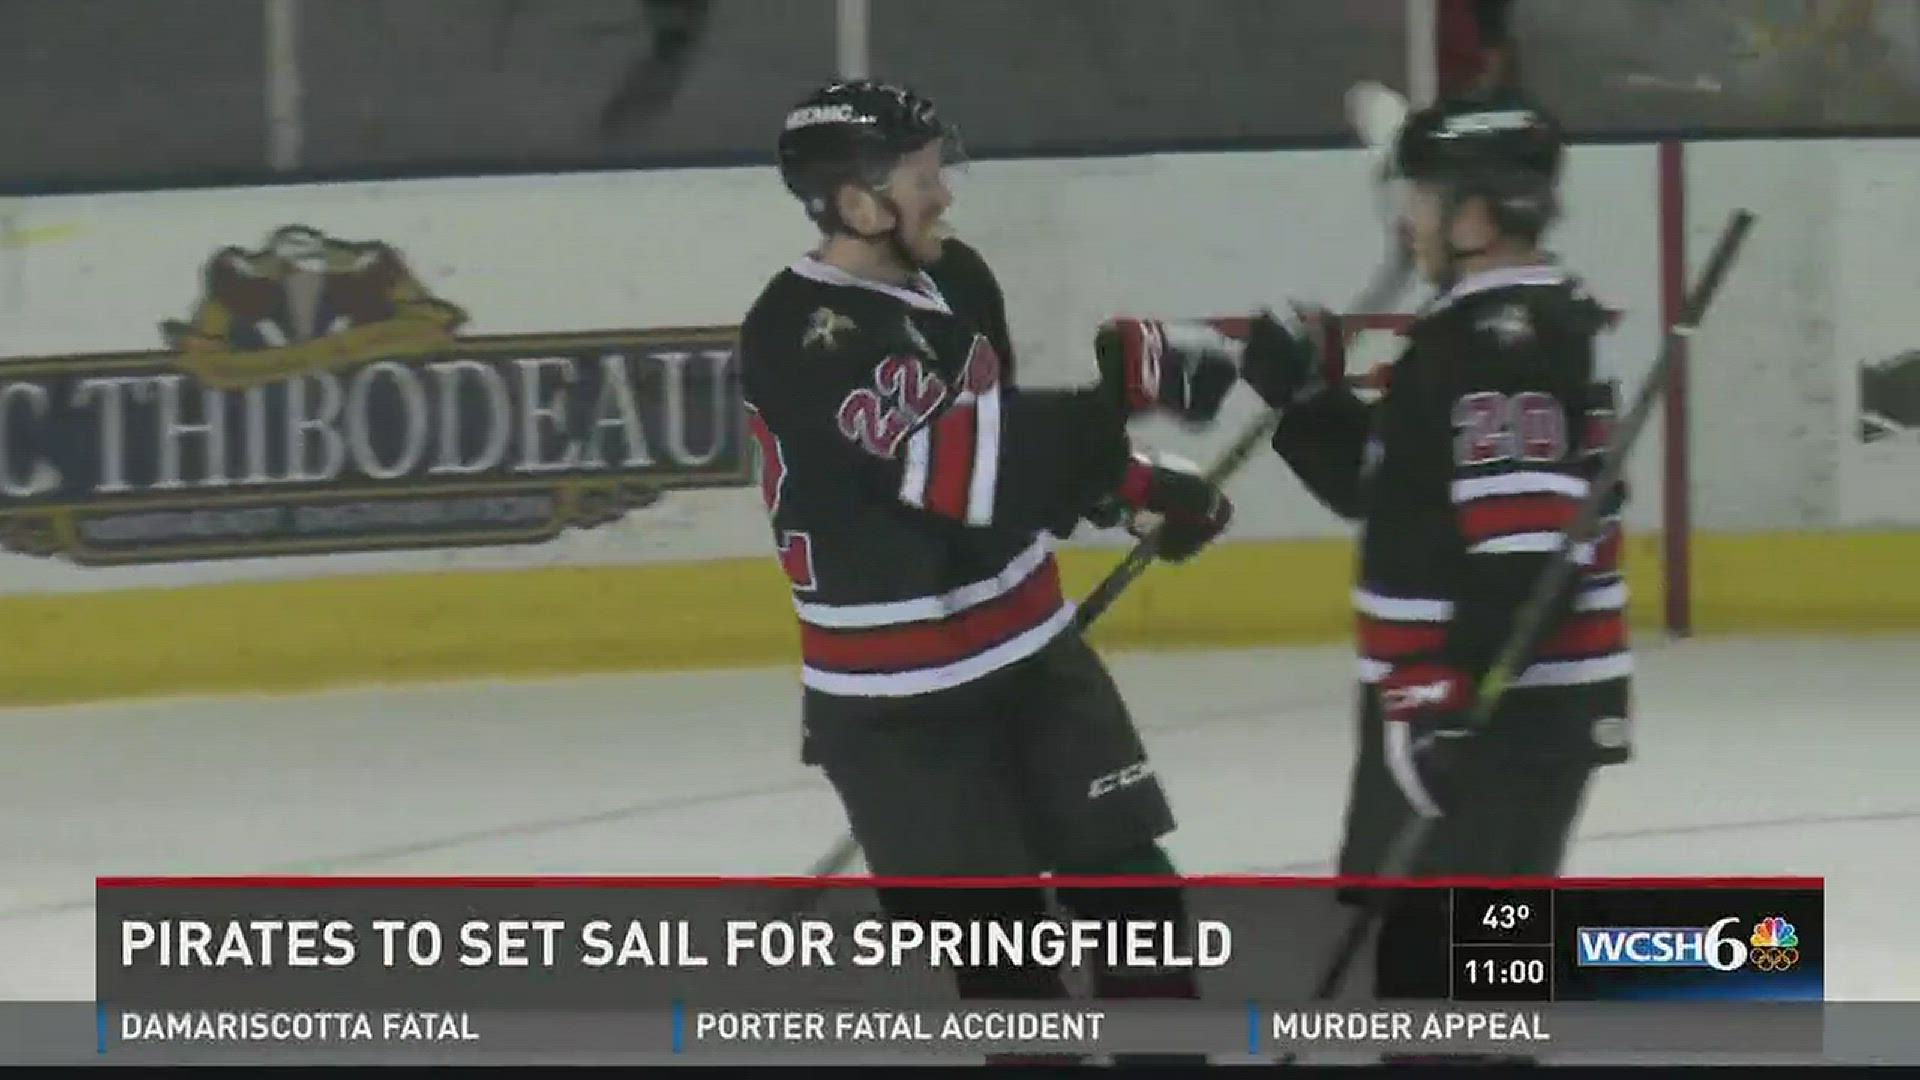 More details about why Portland Pirates are leaving.